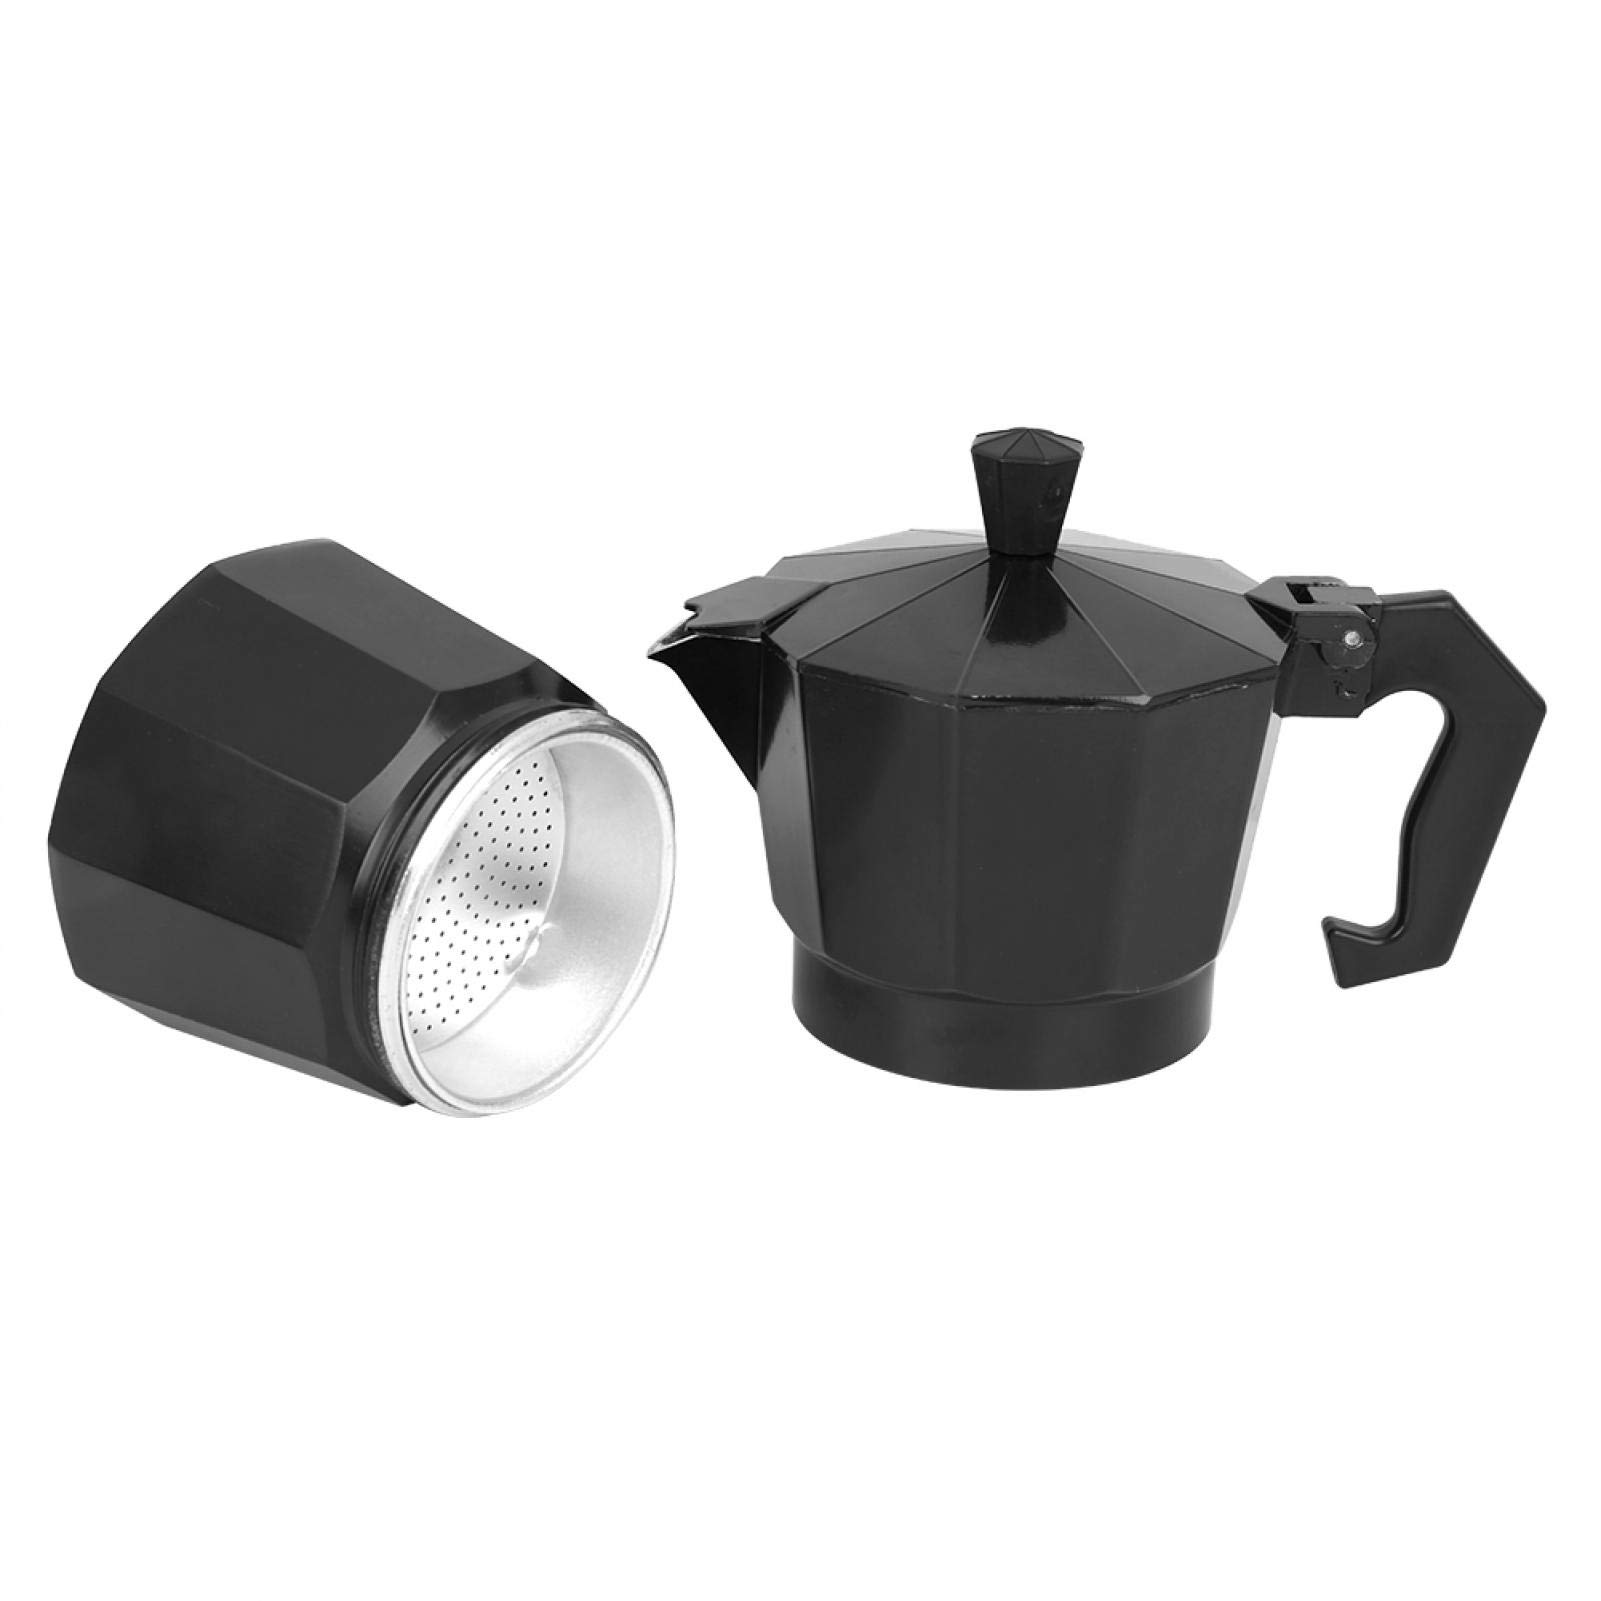 Emoshayoga 300ML 6-Cup Capacity Moka Pot Coffee Supplies Coffee-Making Tool Made of Aluminum for Home and Office(Black)